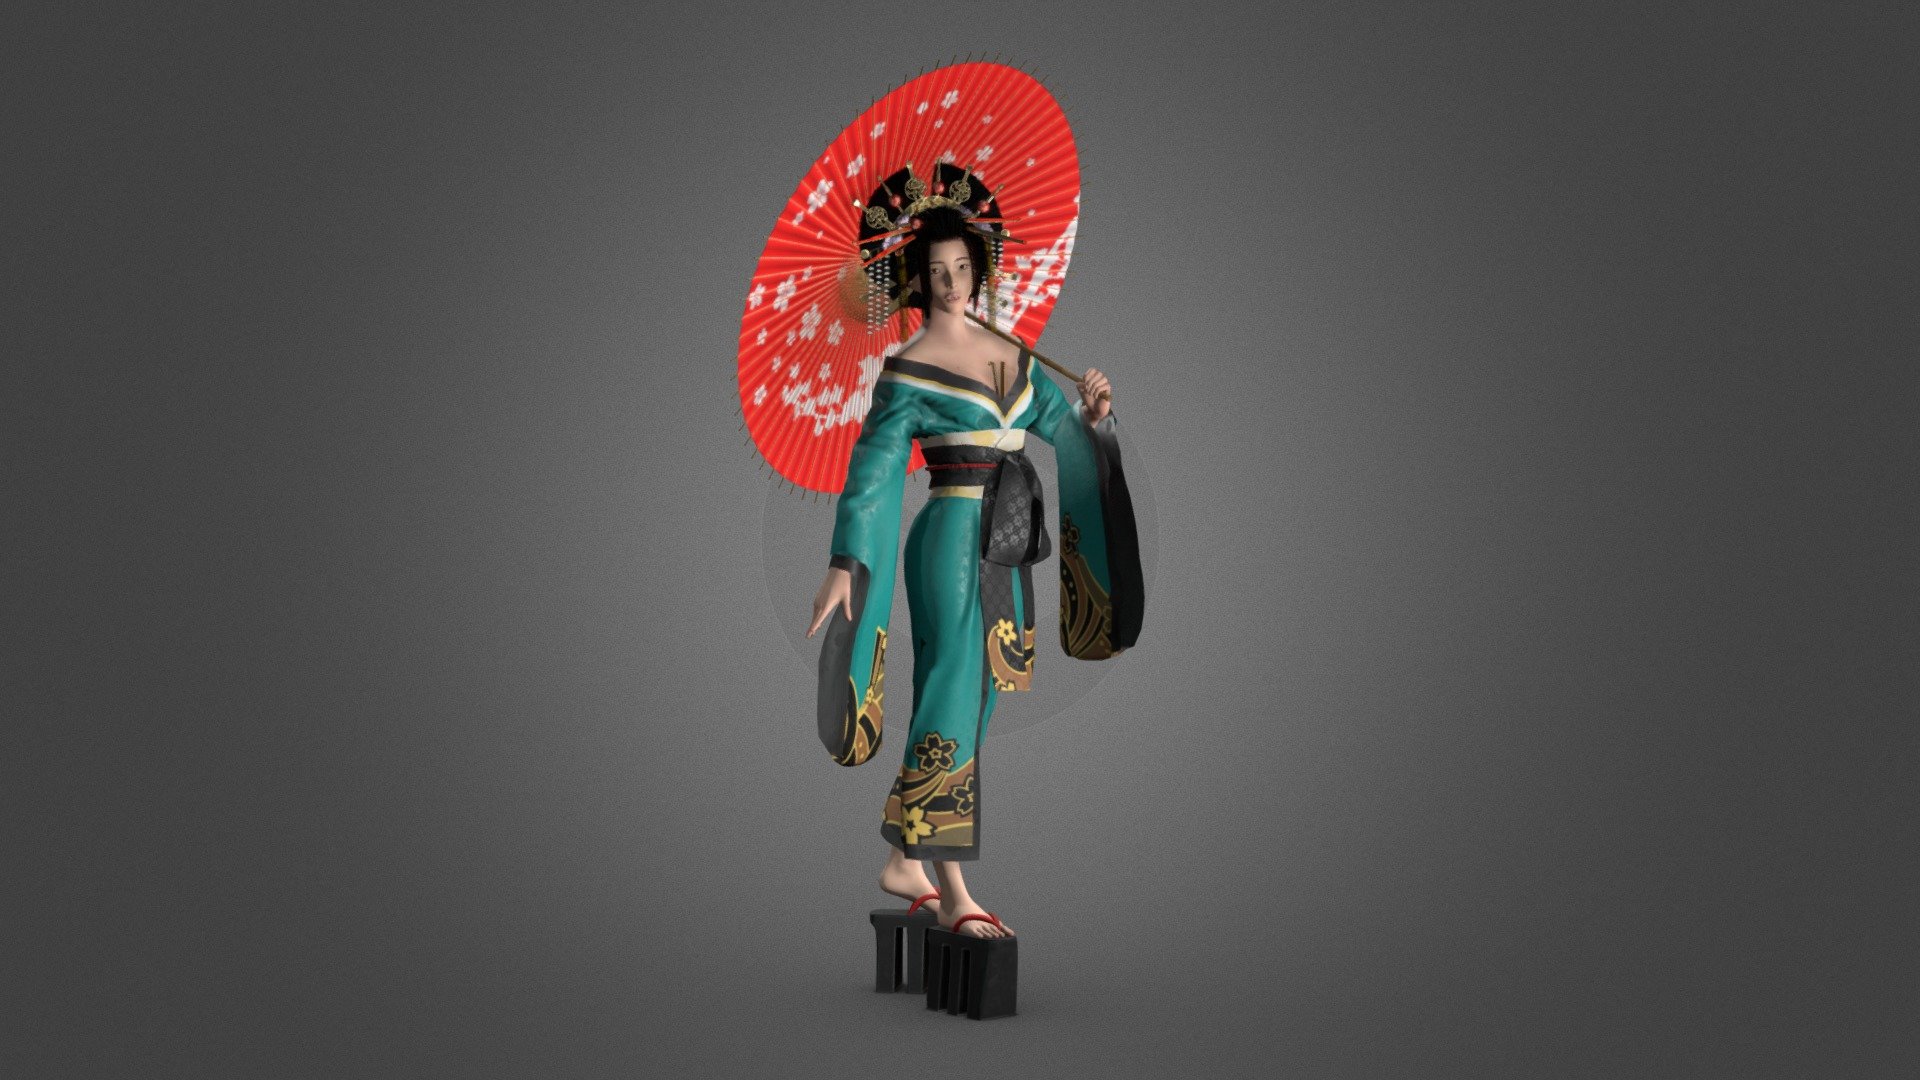 This work is an original art licensed under CC BY-NC 4.0

Original concept ALL RIGHTS RESERVED

Hi everyone! Here my latest work: Oiran, a character I designed. 

Body sculpted in Zbrush, clothes made with Marvelous Designer and accessories modeled in Maya; retopologized and rigged in Maya, textured with Substance 3D Painter with some modifies in Photoshop.

Hope you like it! - Oiran - 3D model by Filippo Ferrarini (@FilippoFerrarini) 3d model